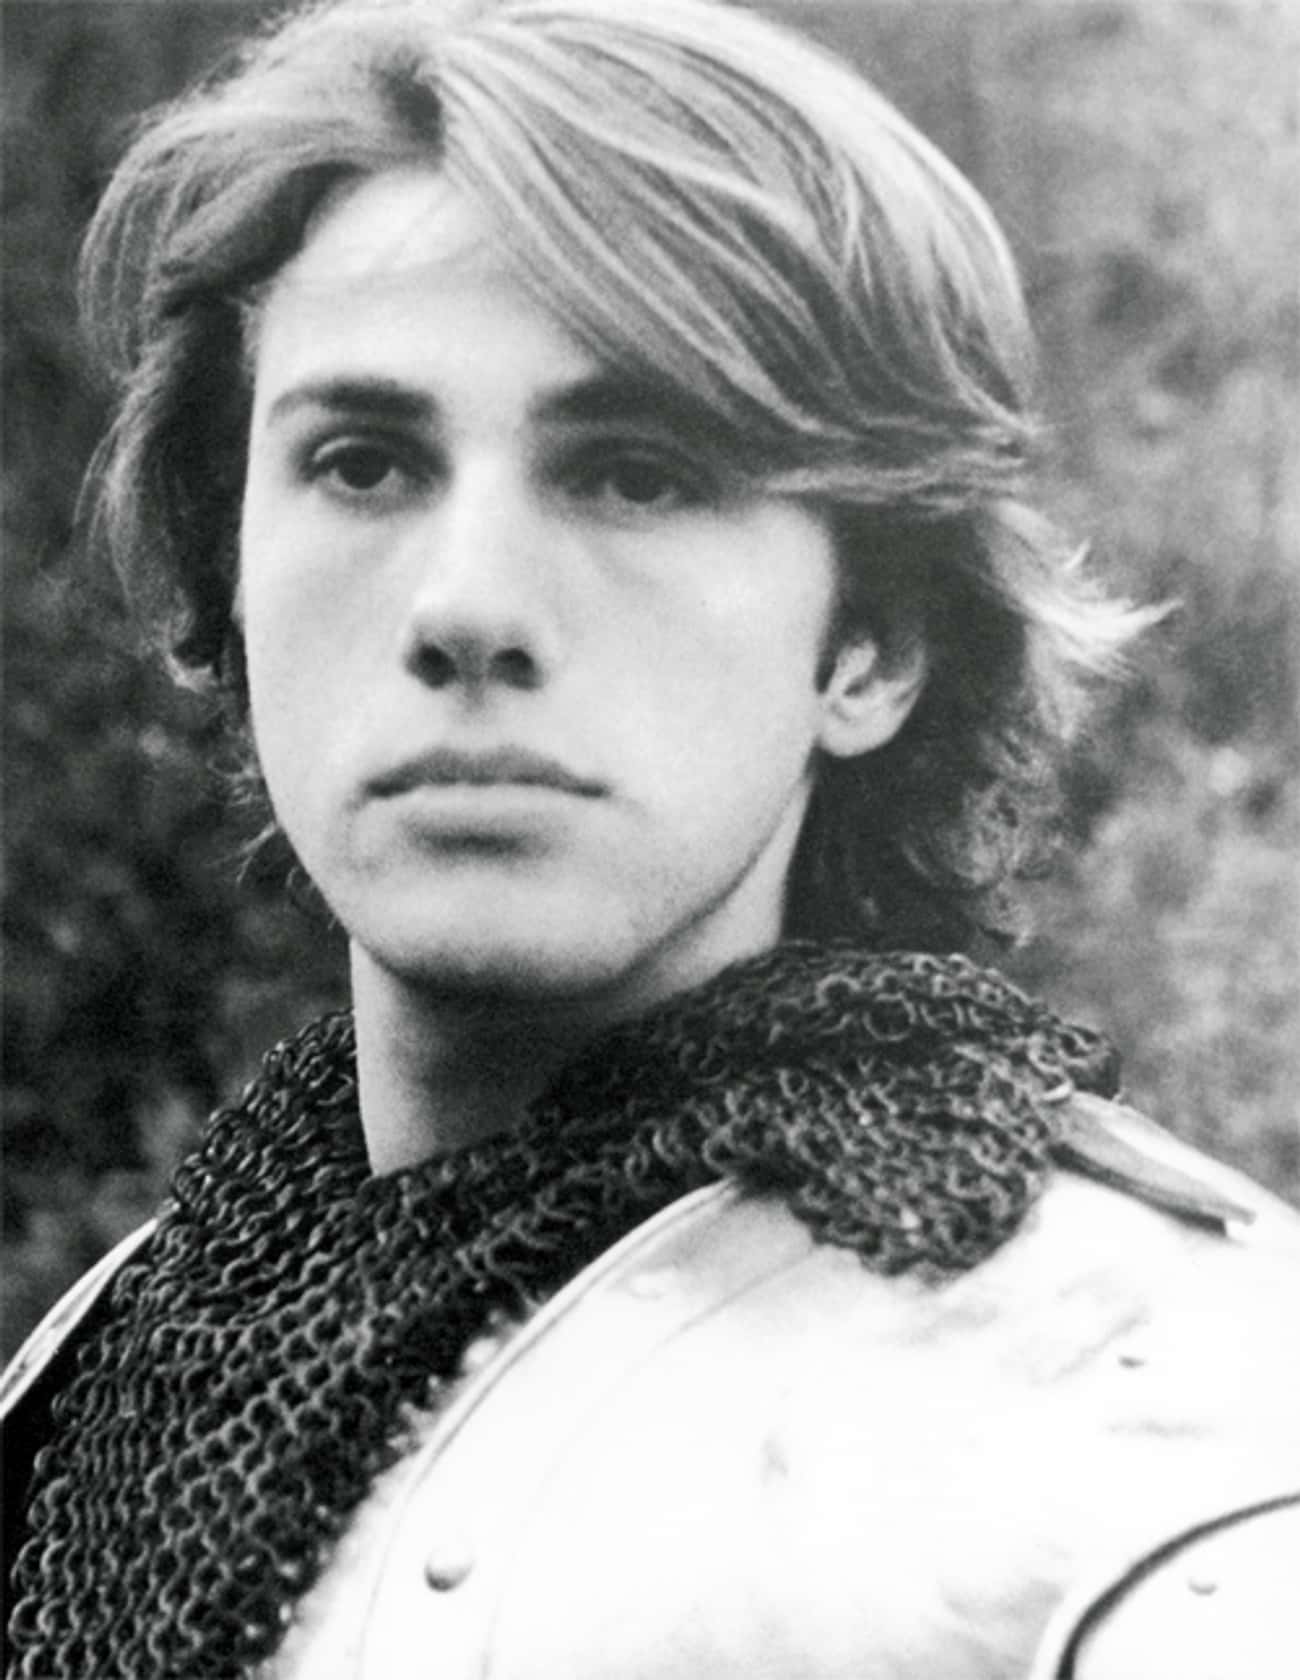 Young Christoph Waltz in Armor